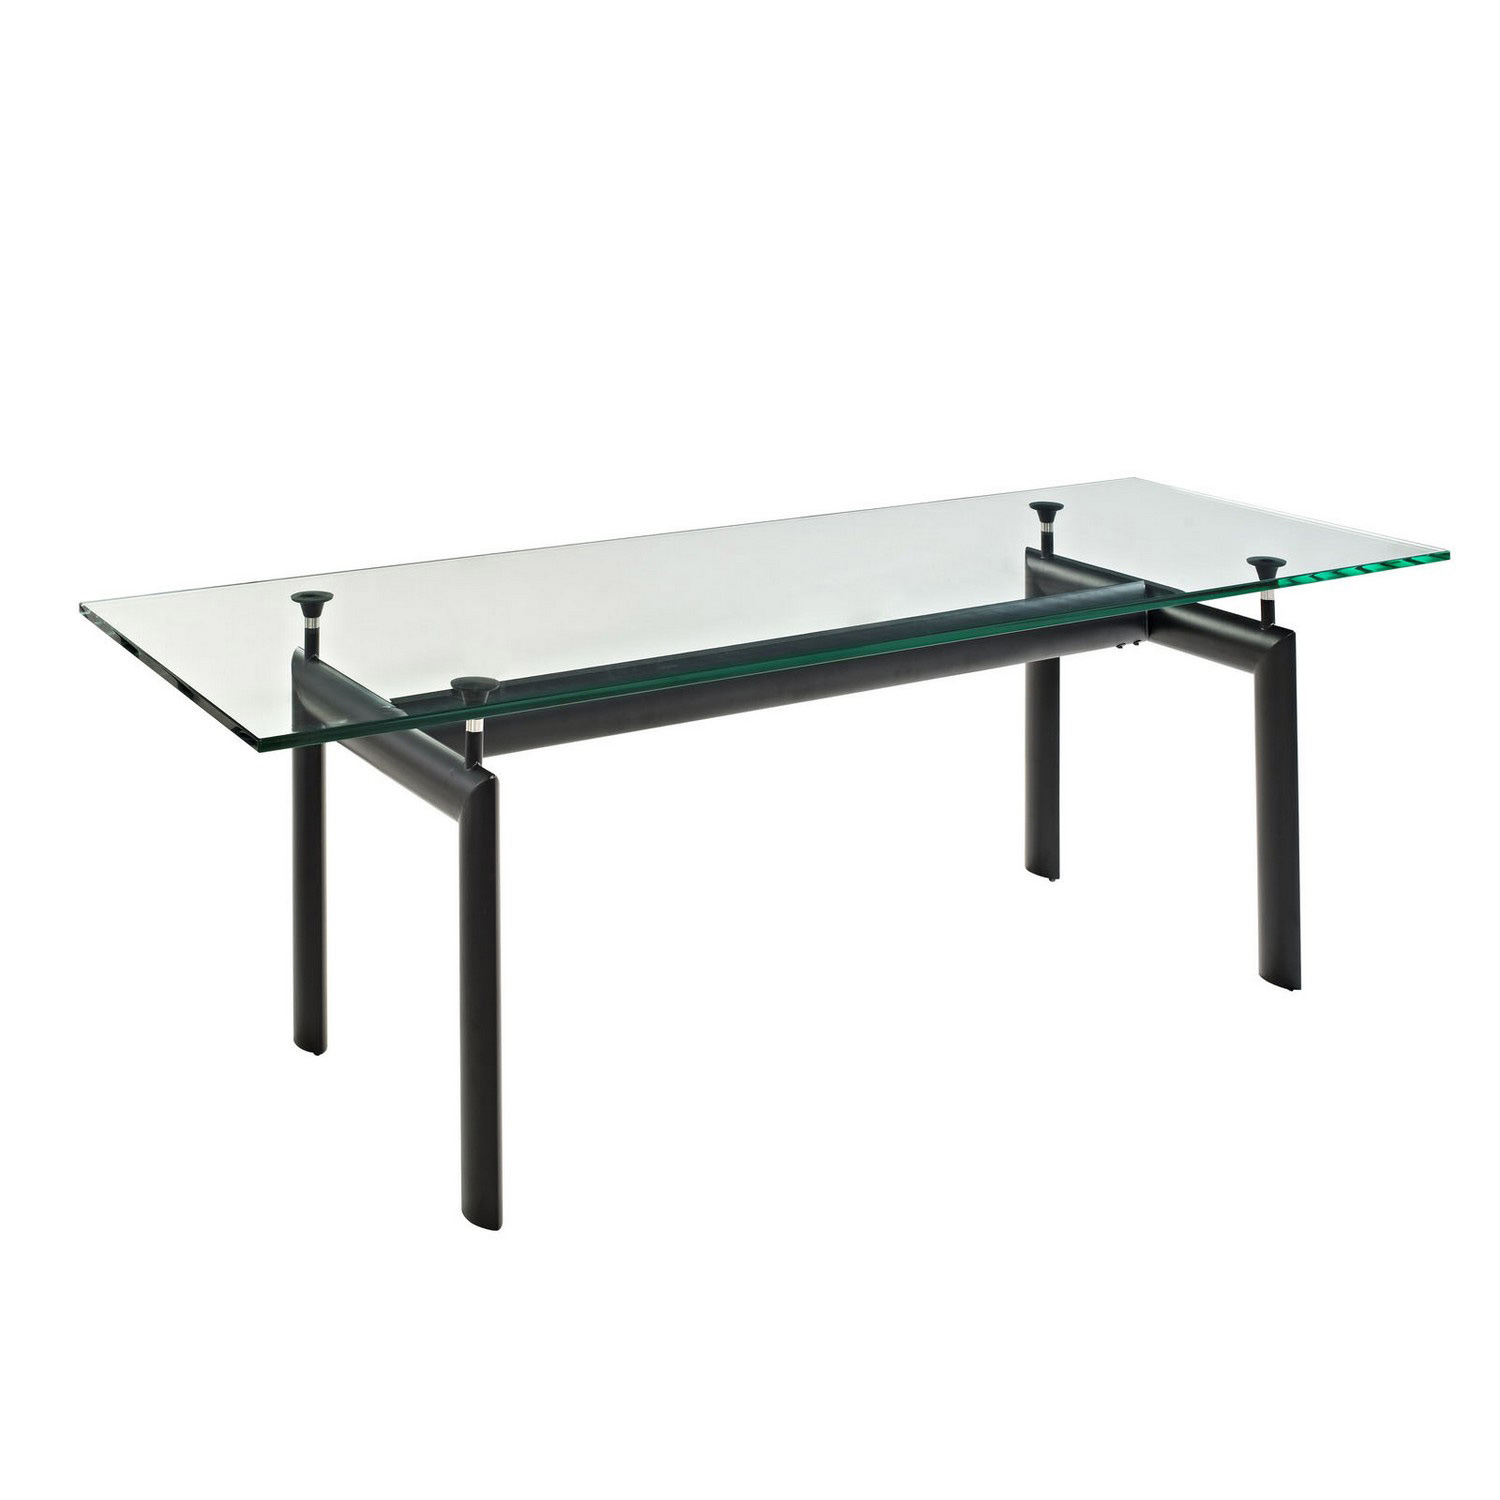 Modway Charles Dining Table - Black